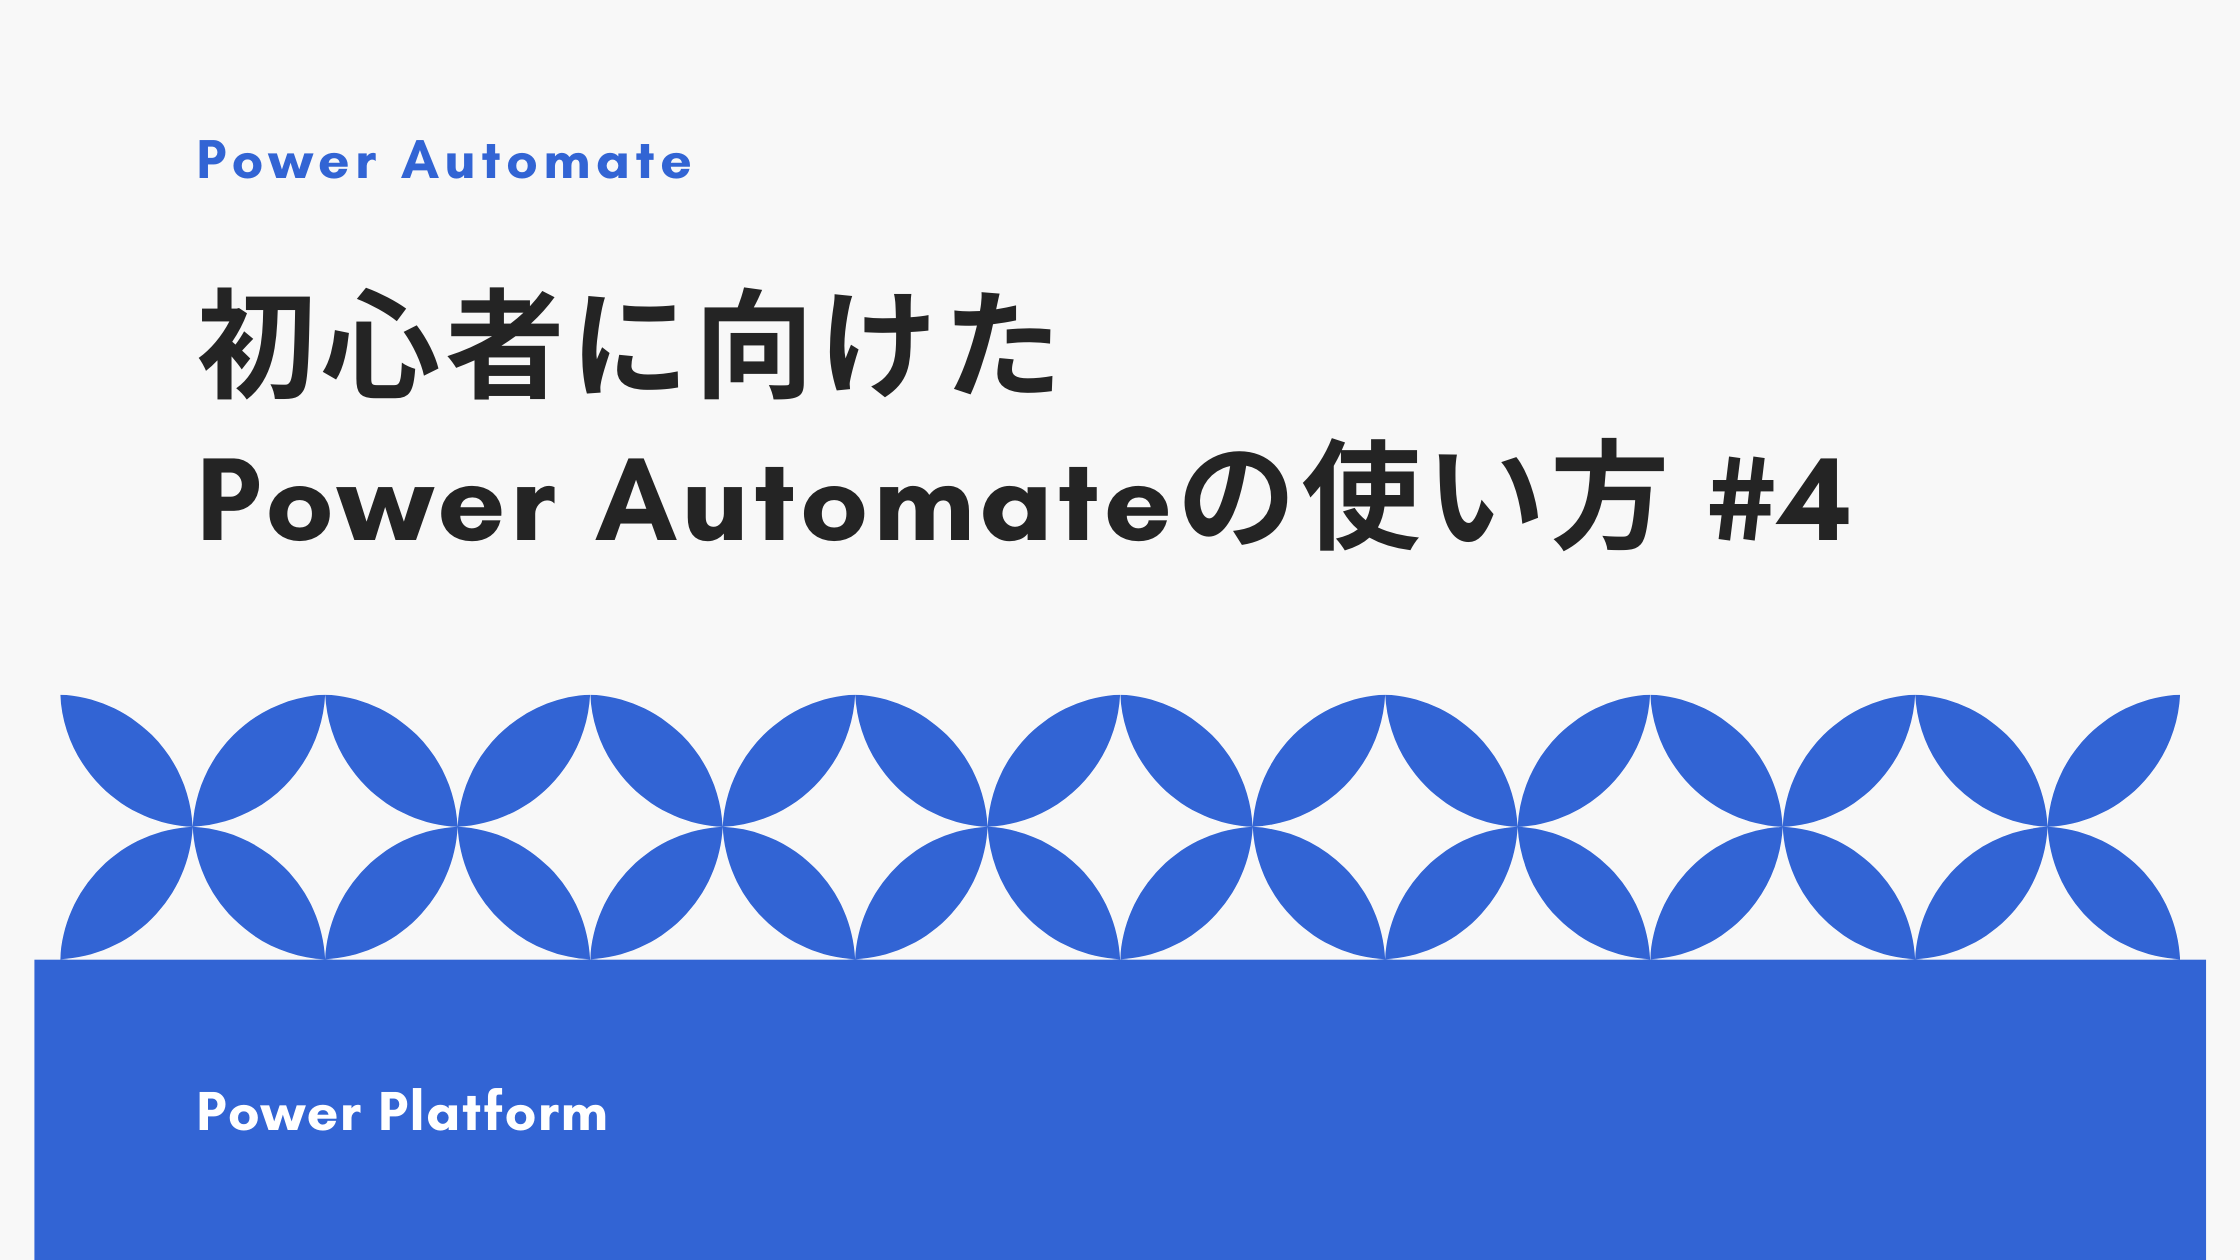 Power Apps / Power Automate で大量データを扱うときのポイント（前編）